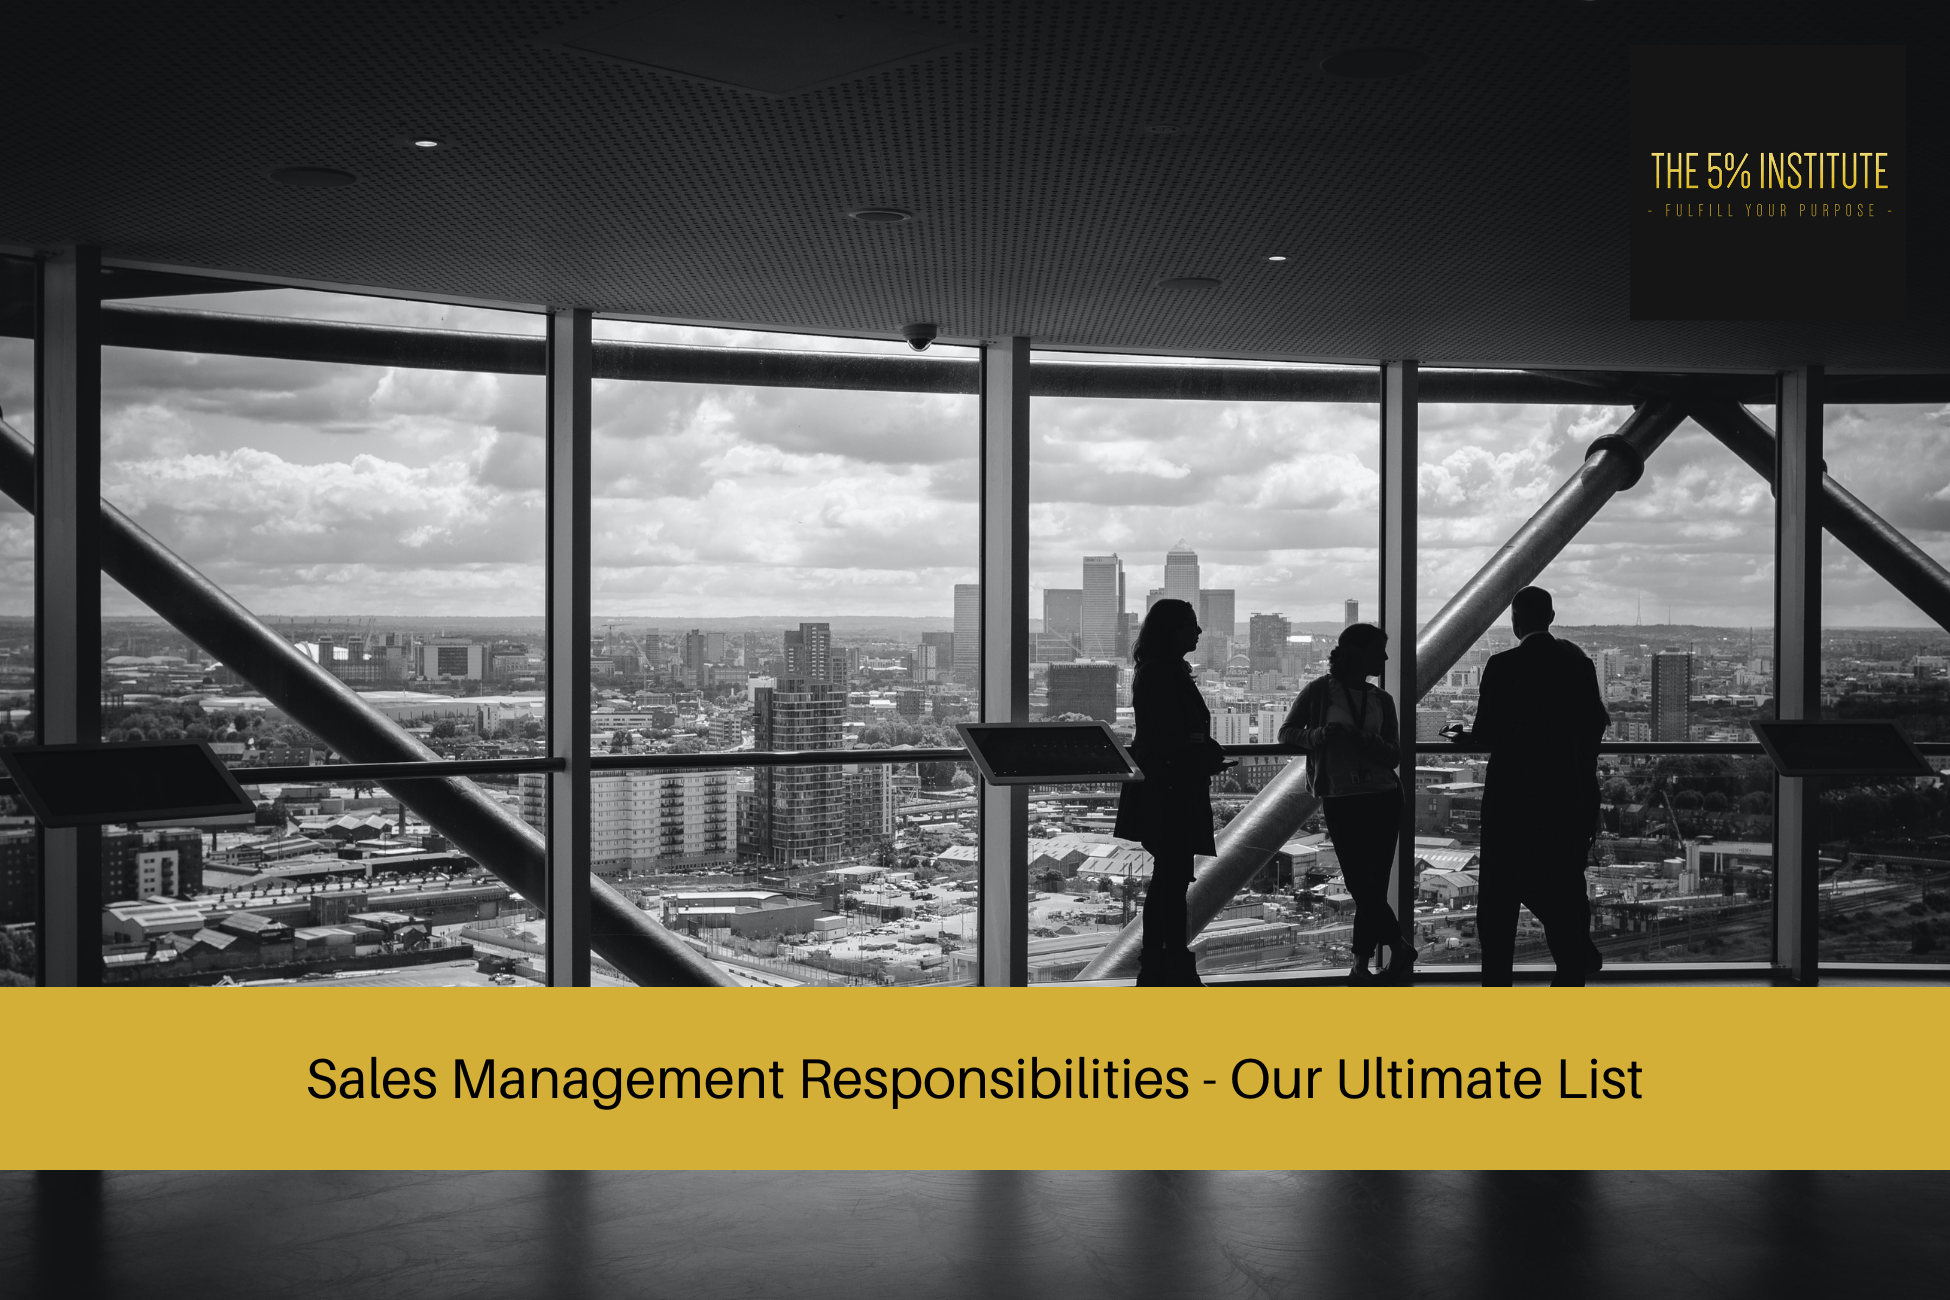 Sales Management Responsibilities - Our Ultimate List